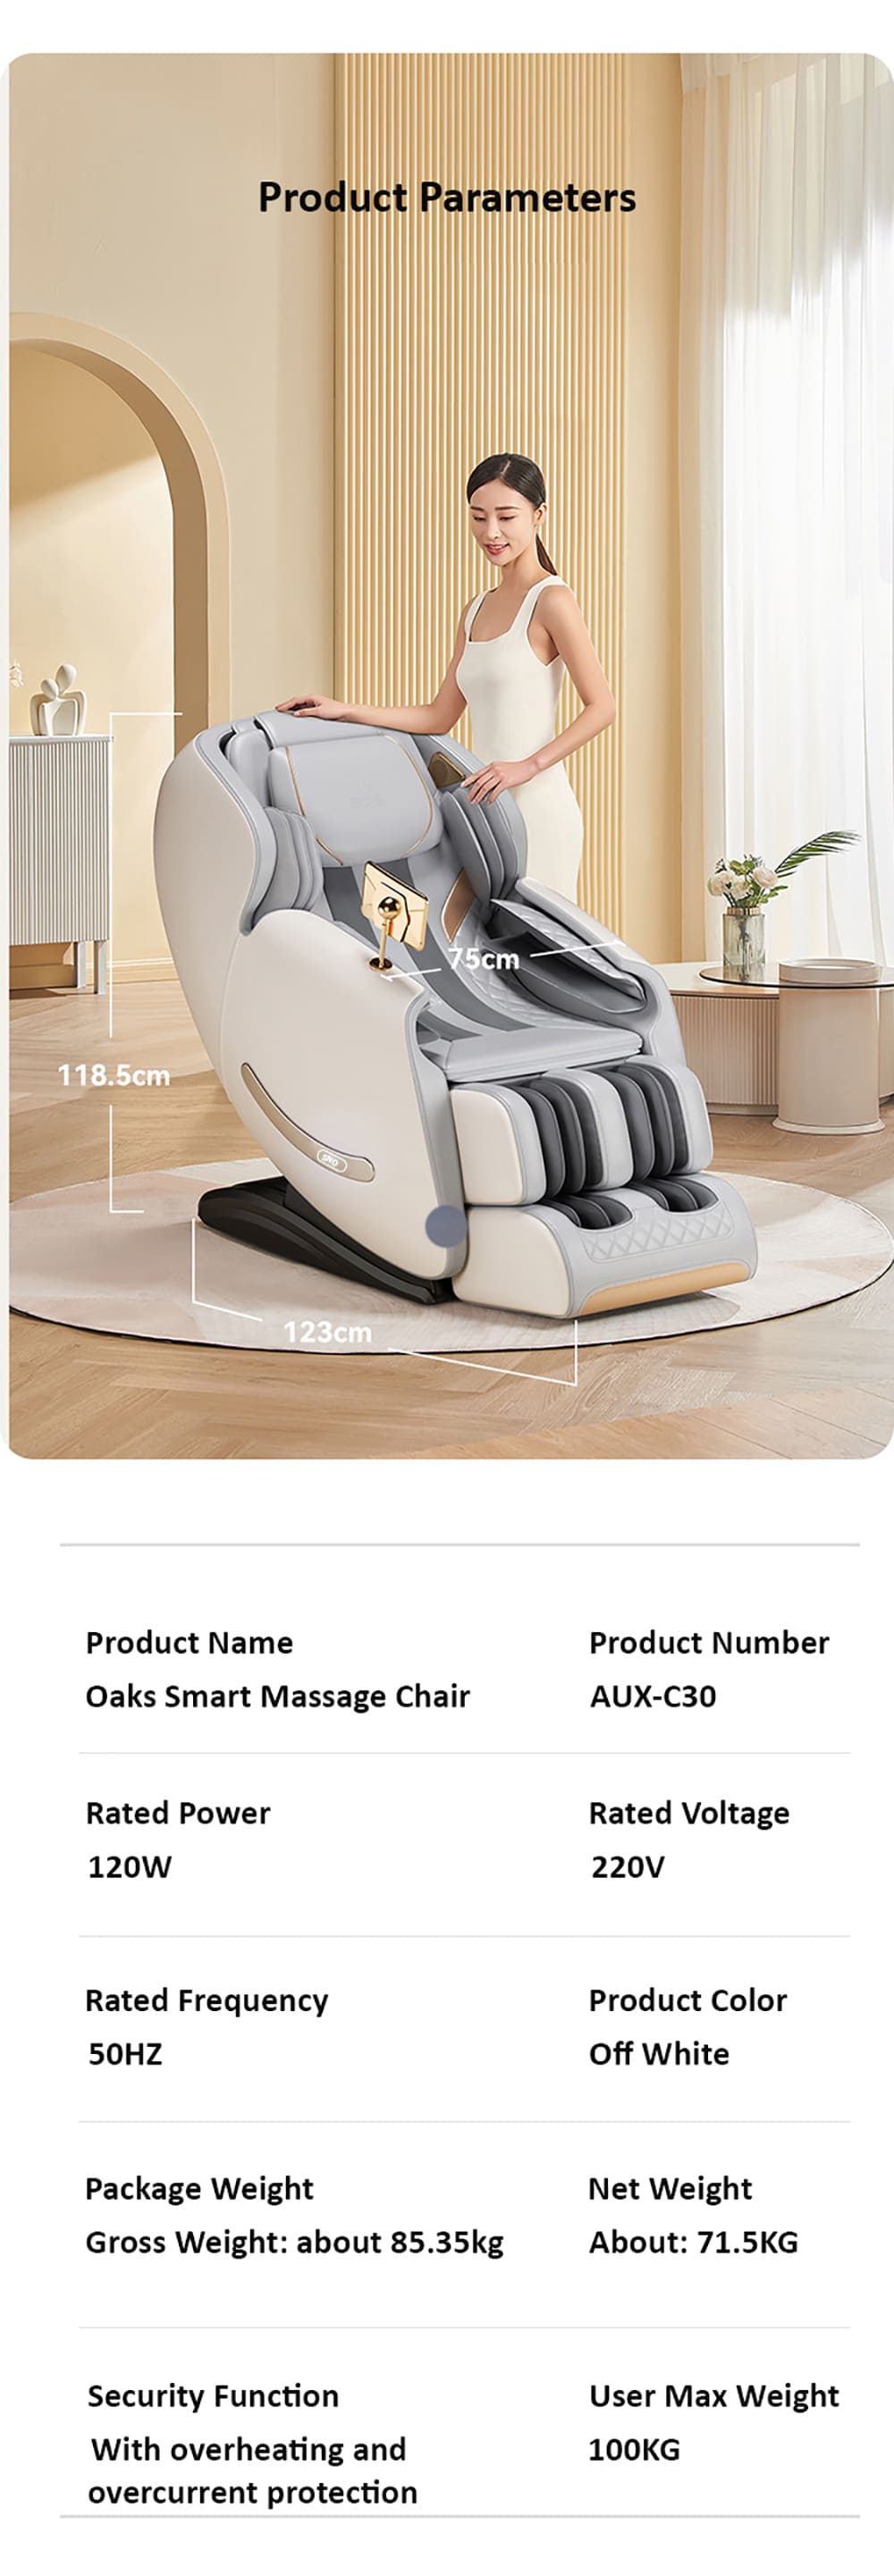 Specification of Massage Chair